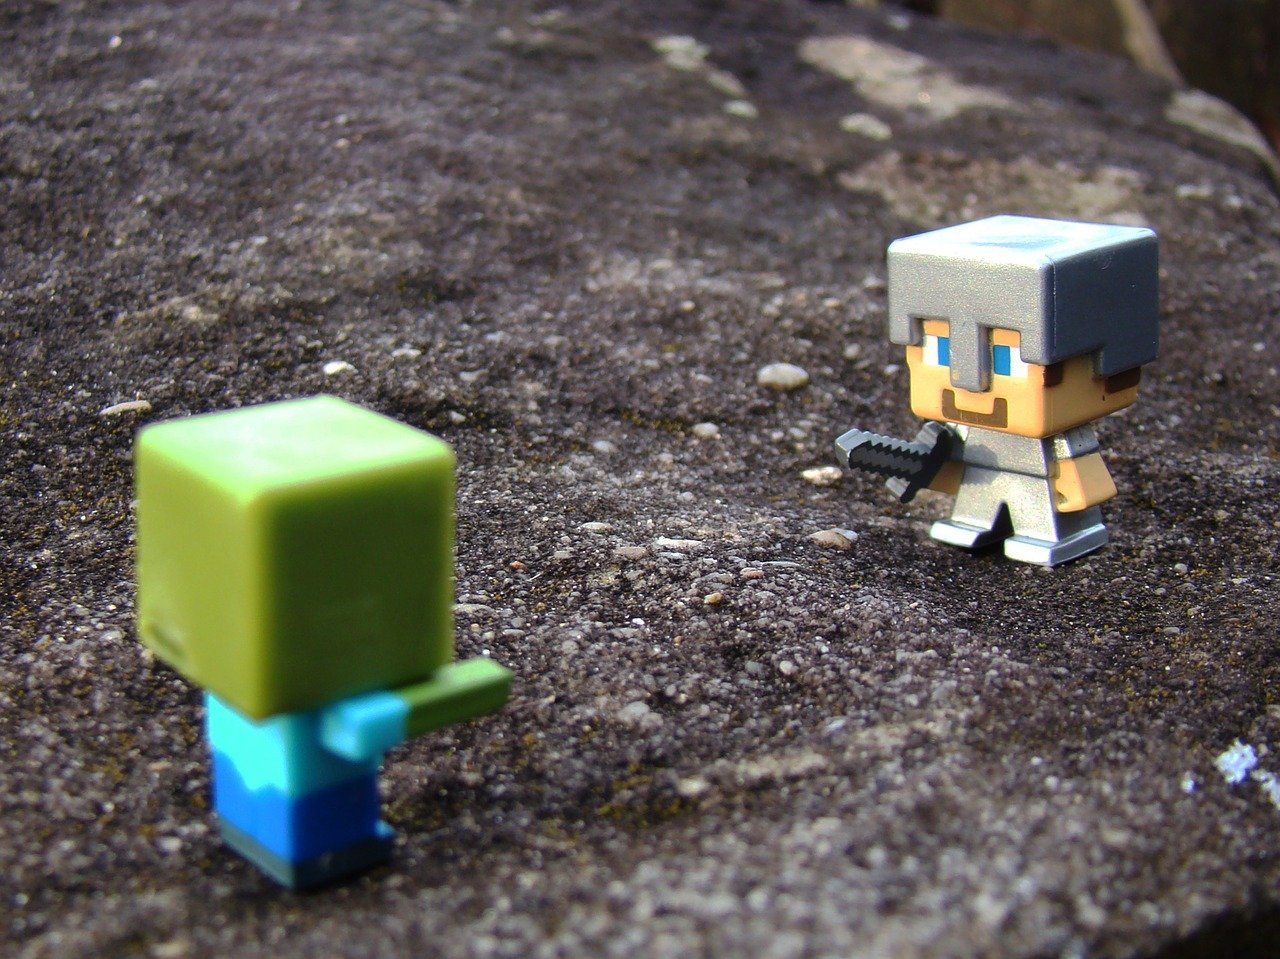 Minecraft toys posed in the dirt